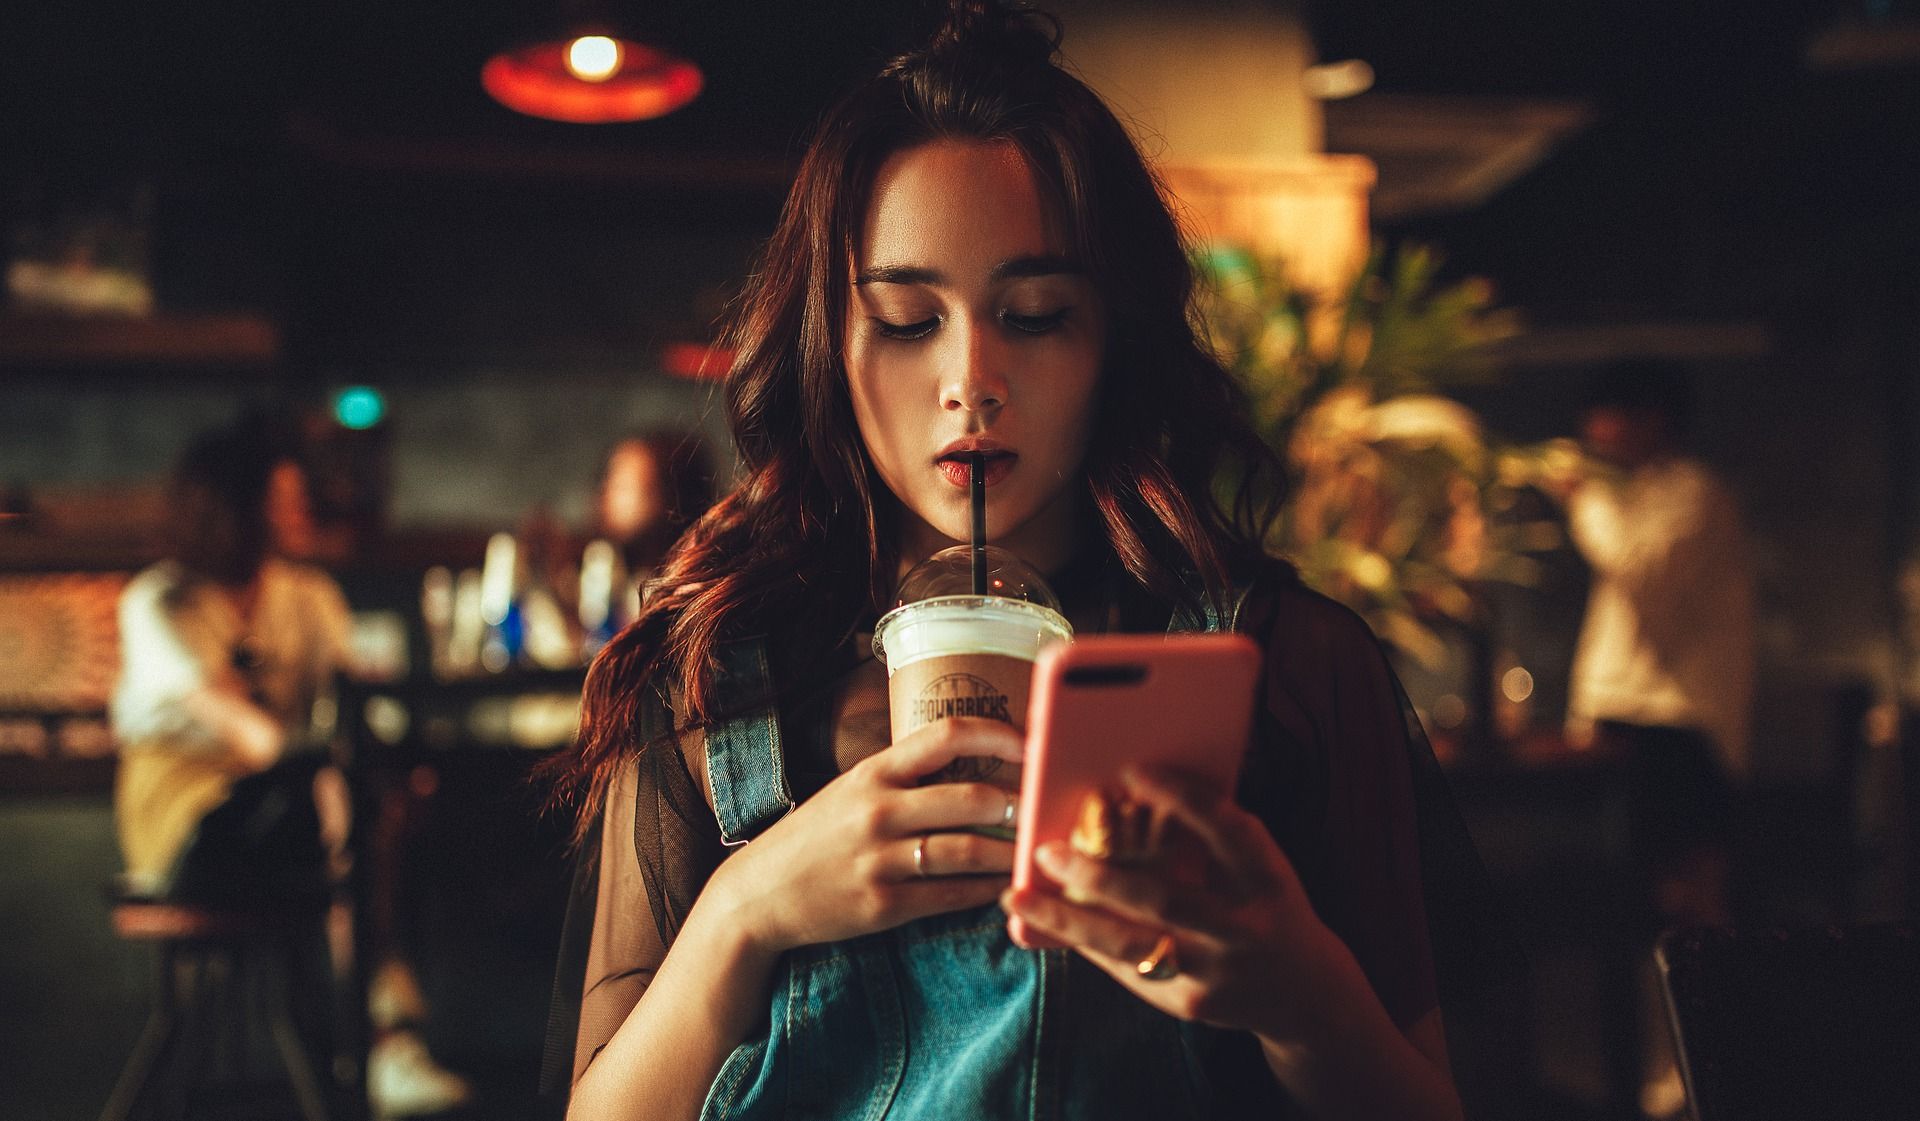 Girl looking at an iPhone and drinking an iced coffee